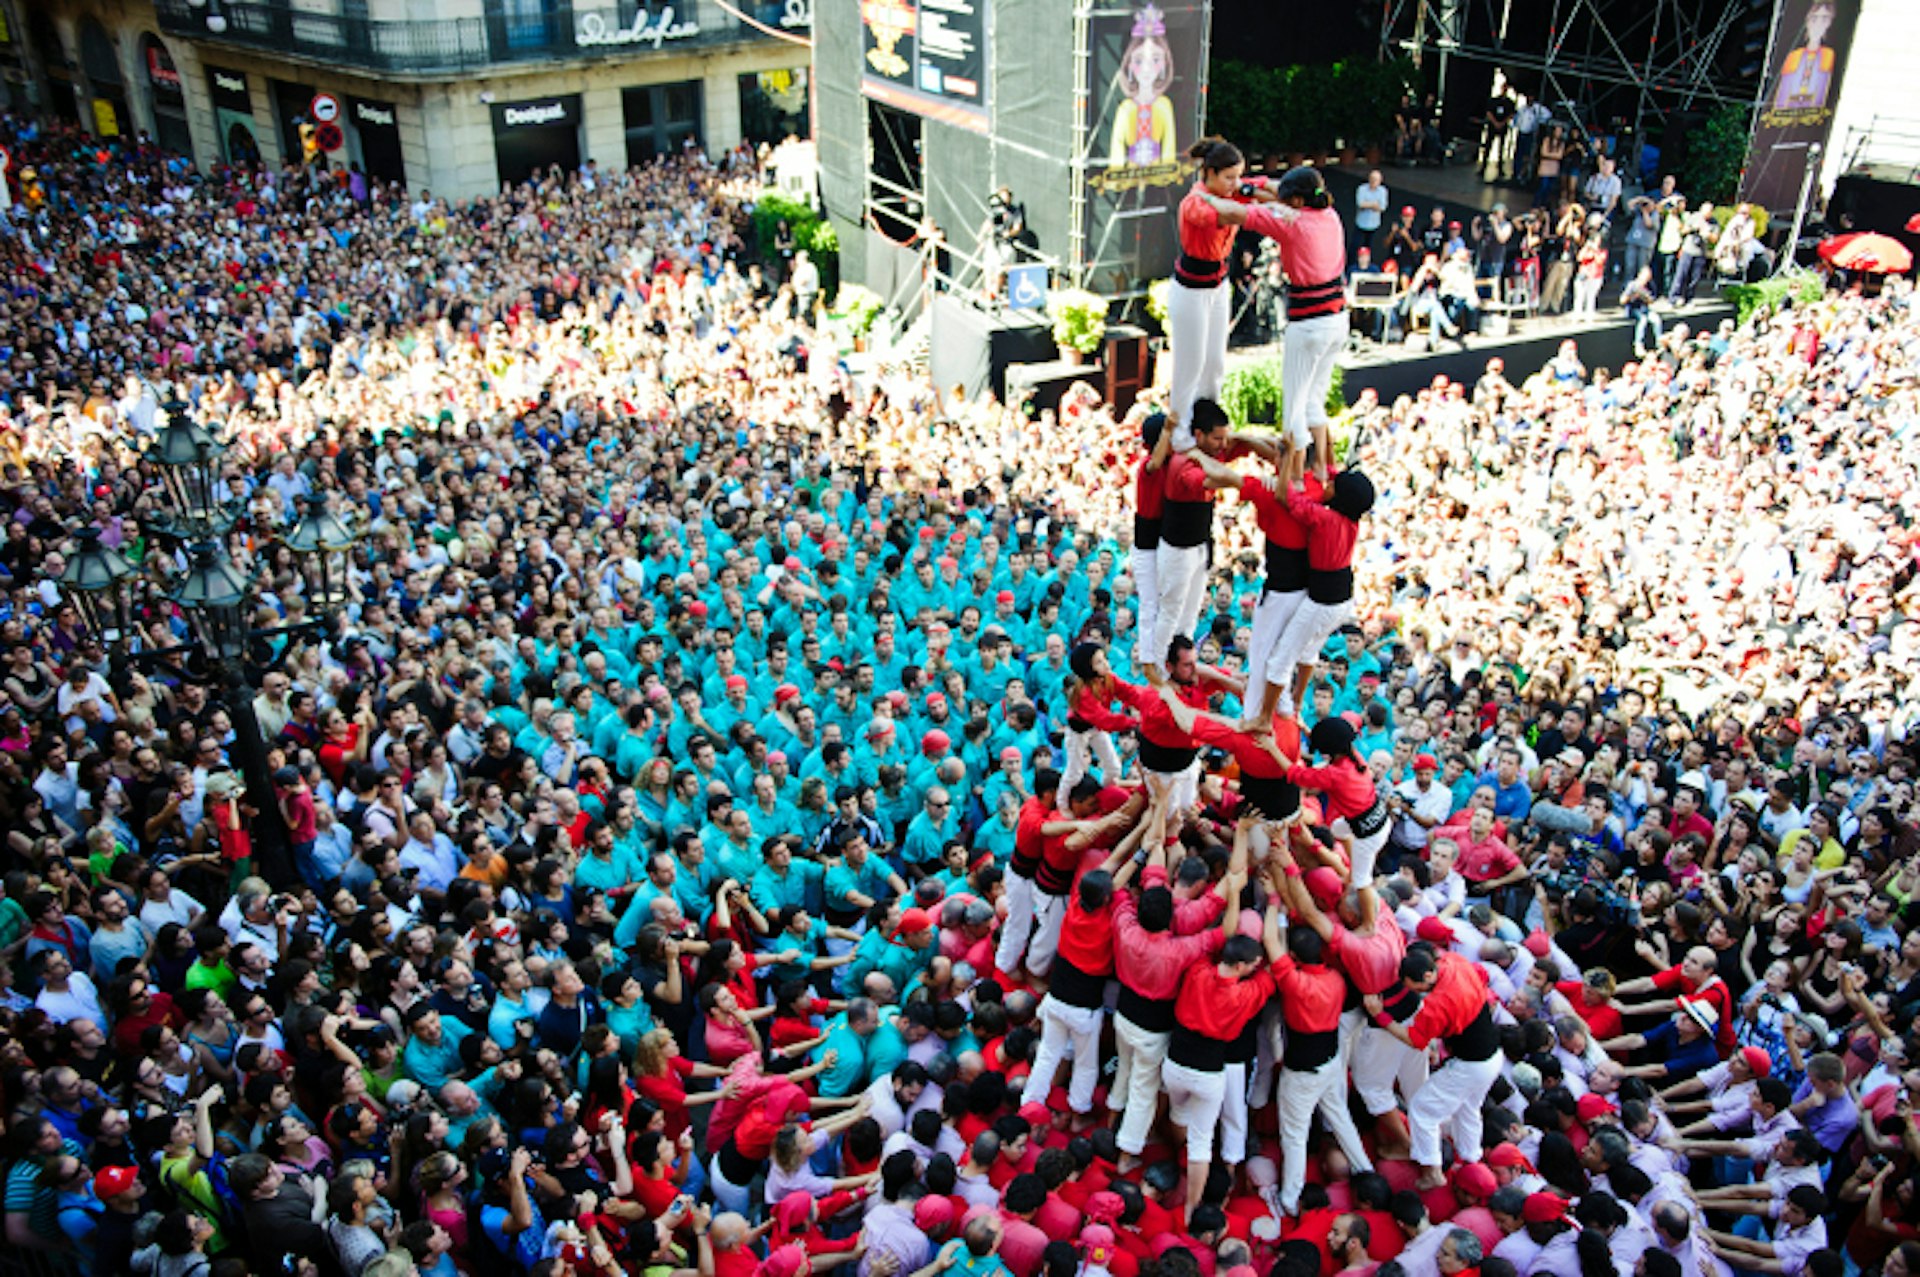 Castellers (human towers) for the last day of La Mercè. Image by Guillem Lopez / Getty images